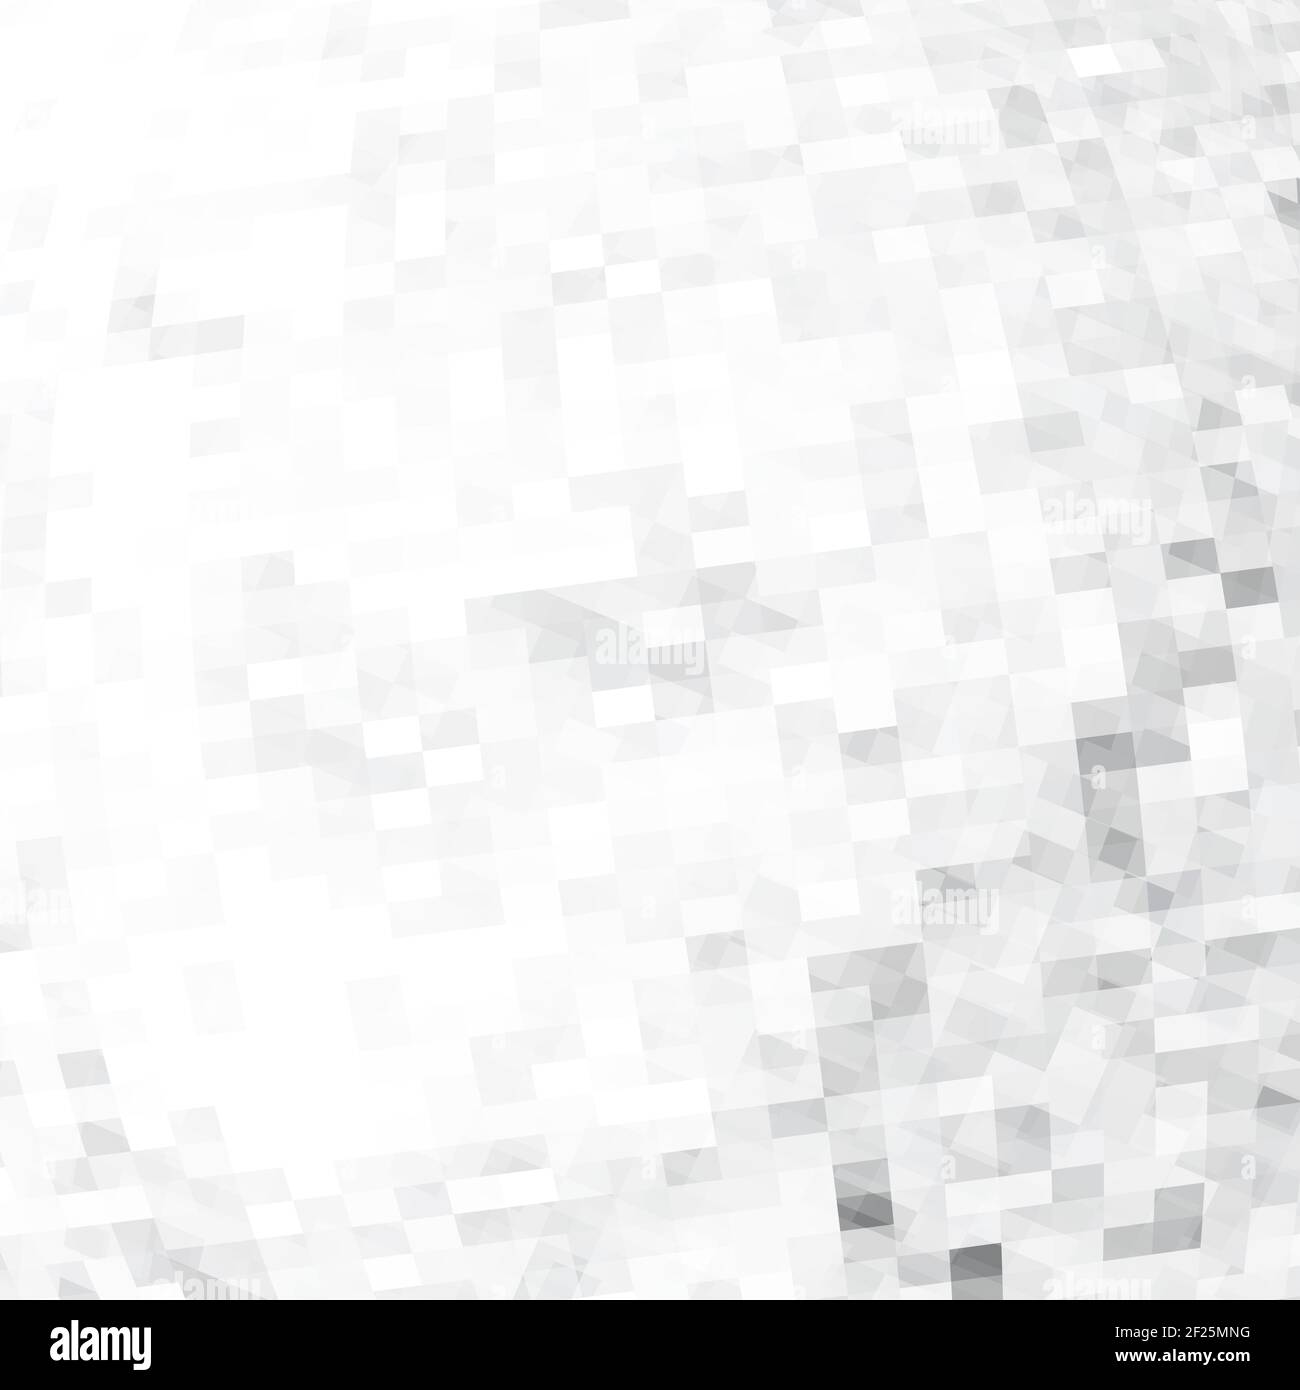 Grayscale pattern. Subtle black-and-white background. Abstract chaotic graphic pattern Stock Photo